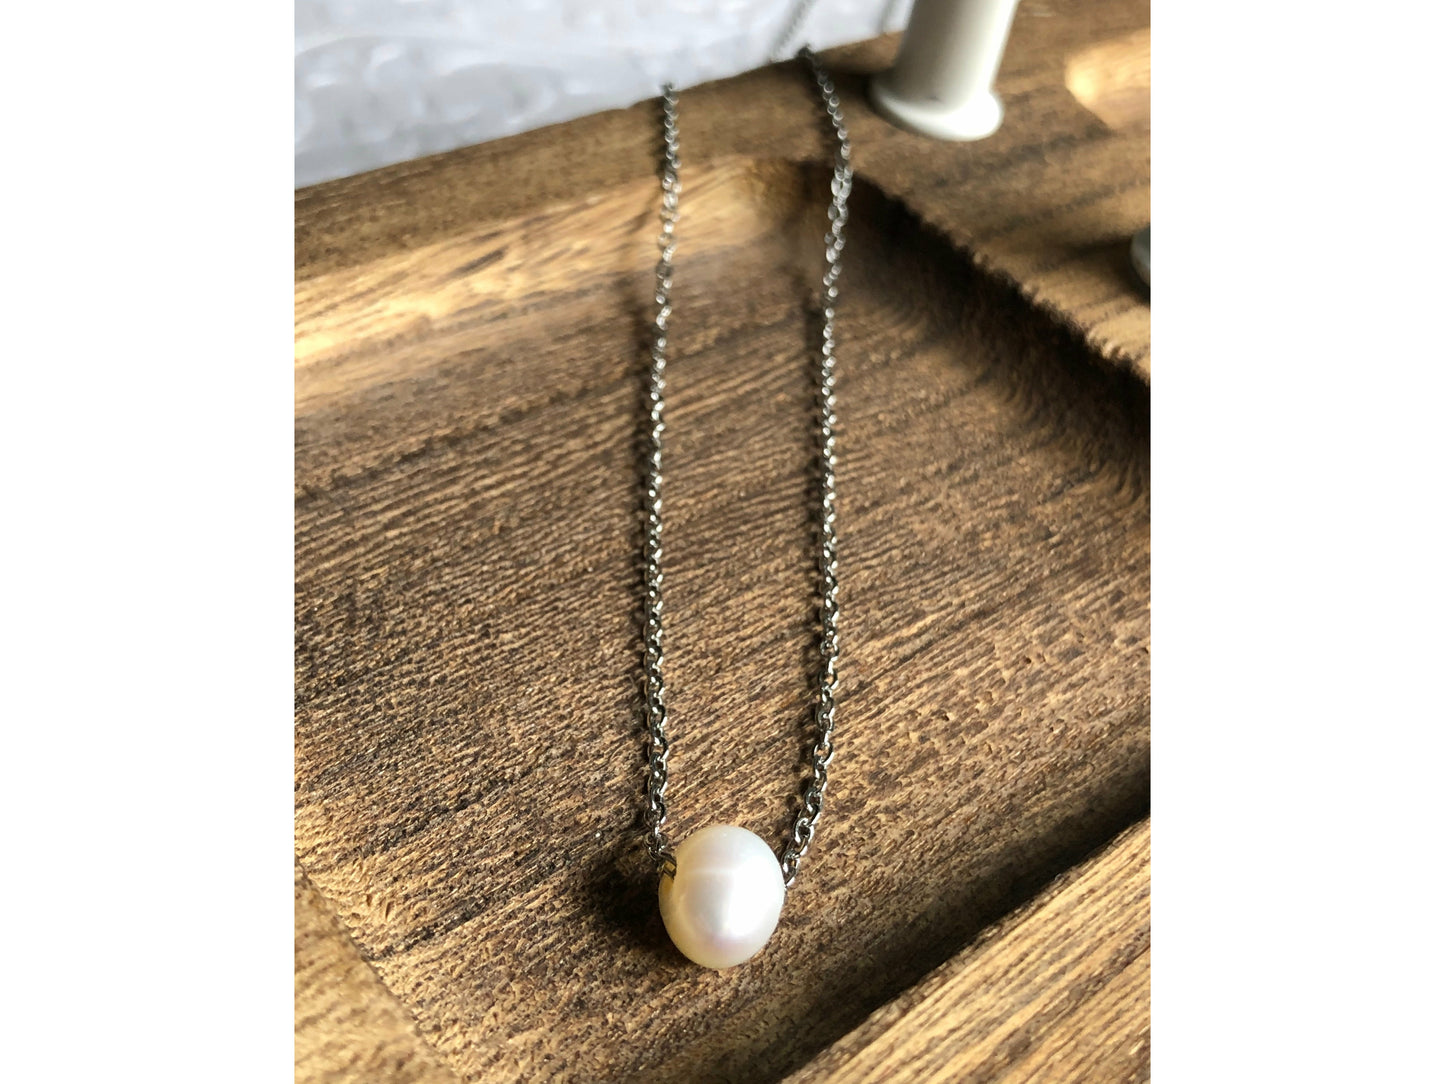 Small simple pearl with the chain of the necklace fed through it